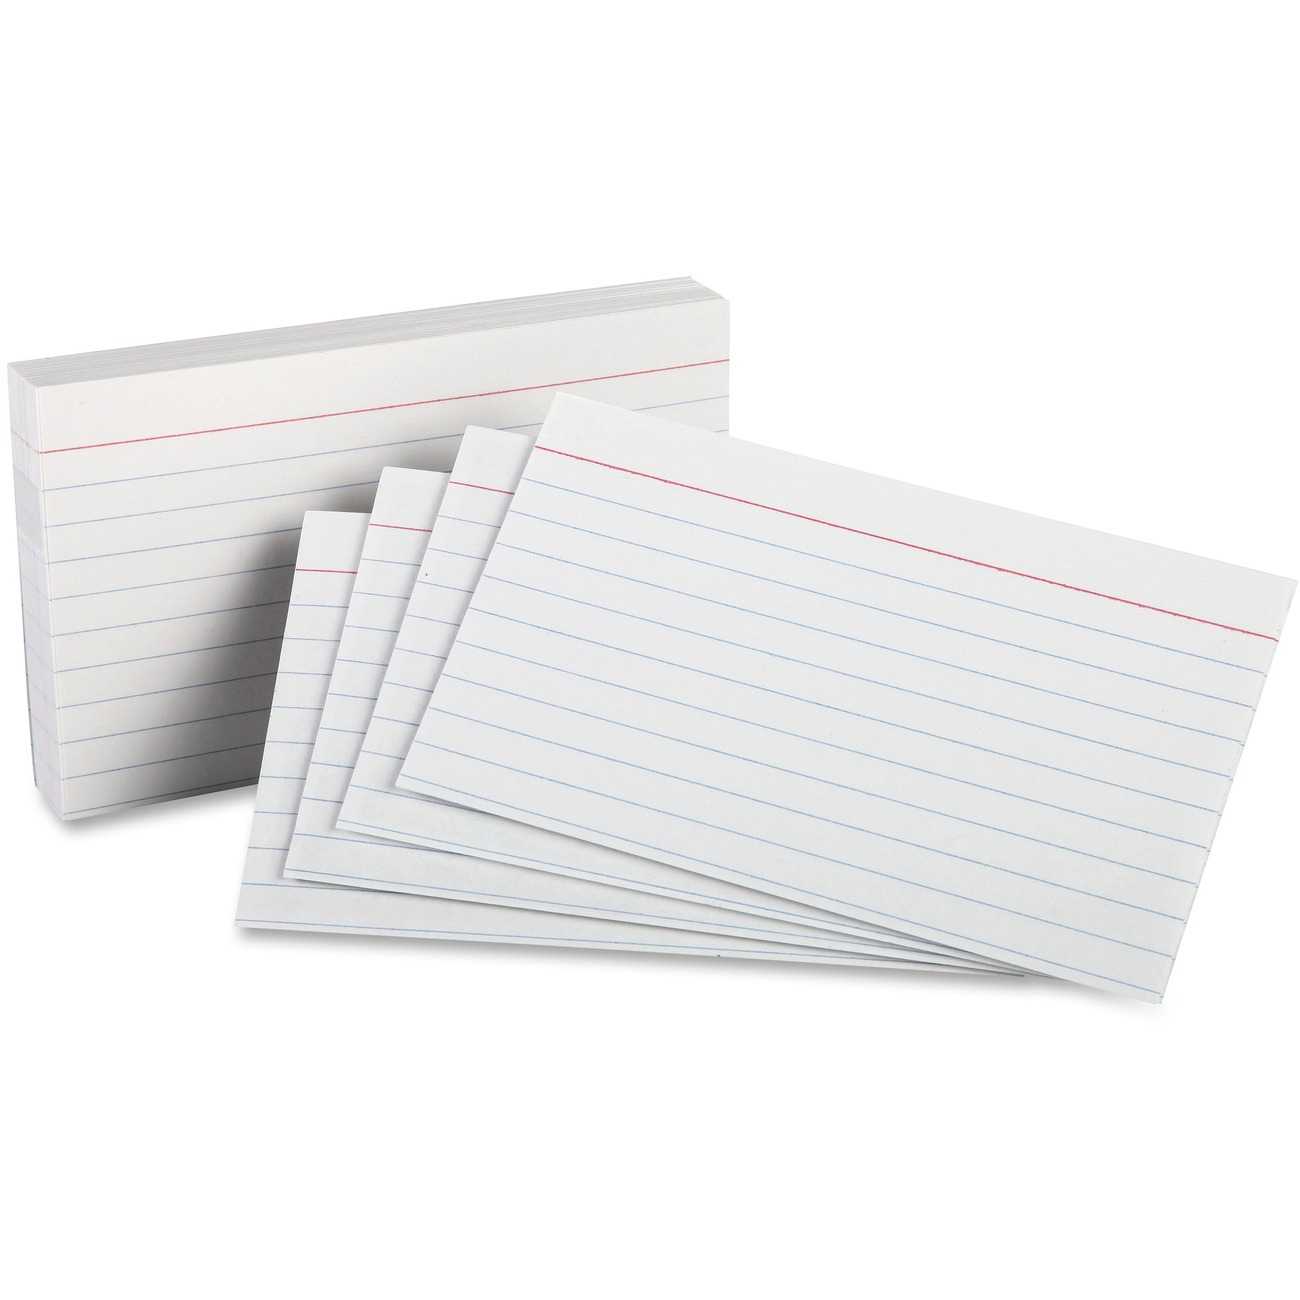 Kamloops Office Systems :: Office Supplies :: Paper & Pads With 5 By 8 Index Card Template